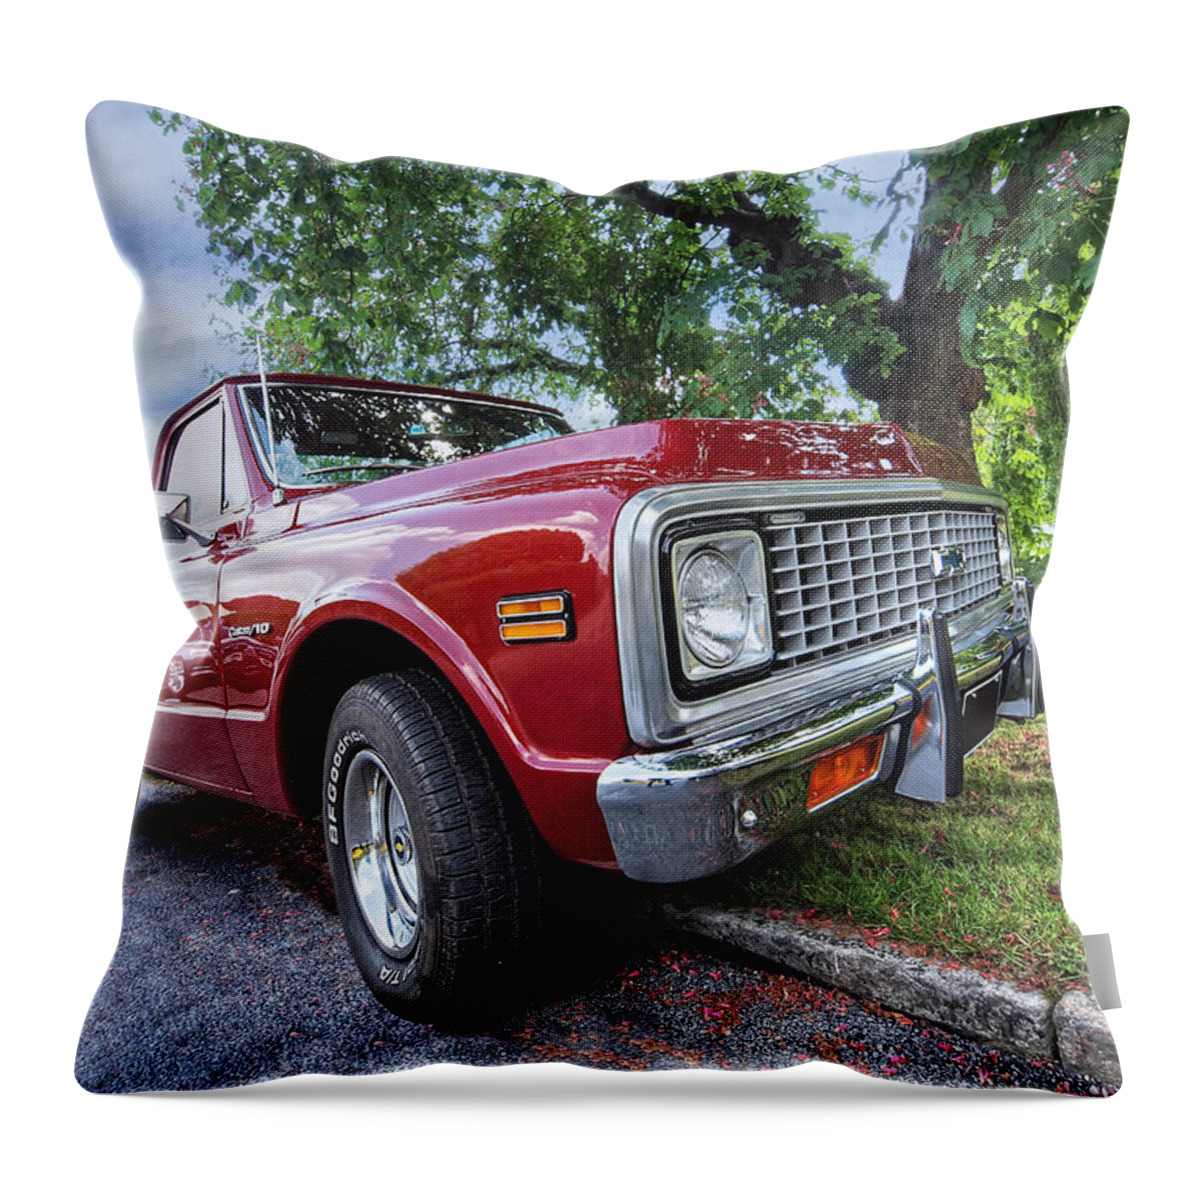 Chevrolet Truck Throw Pillow featuring the photograph Halcyon Days - 1971 Chevy Pickup by Gill Billington